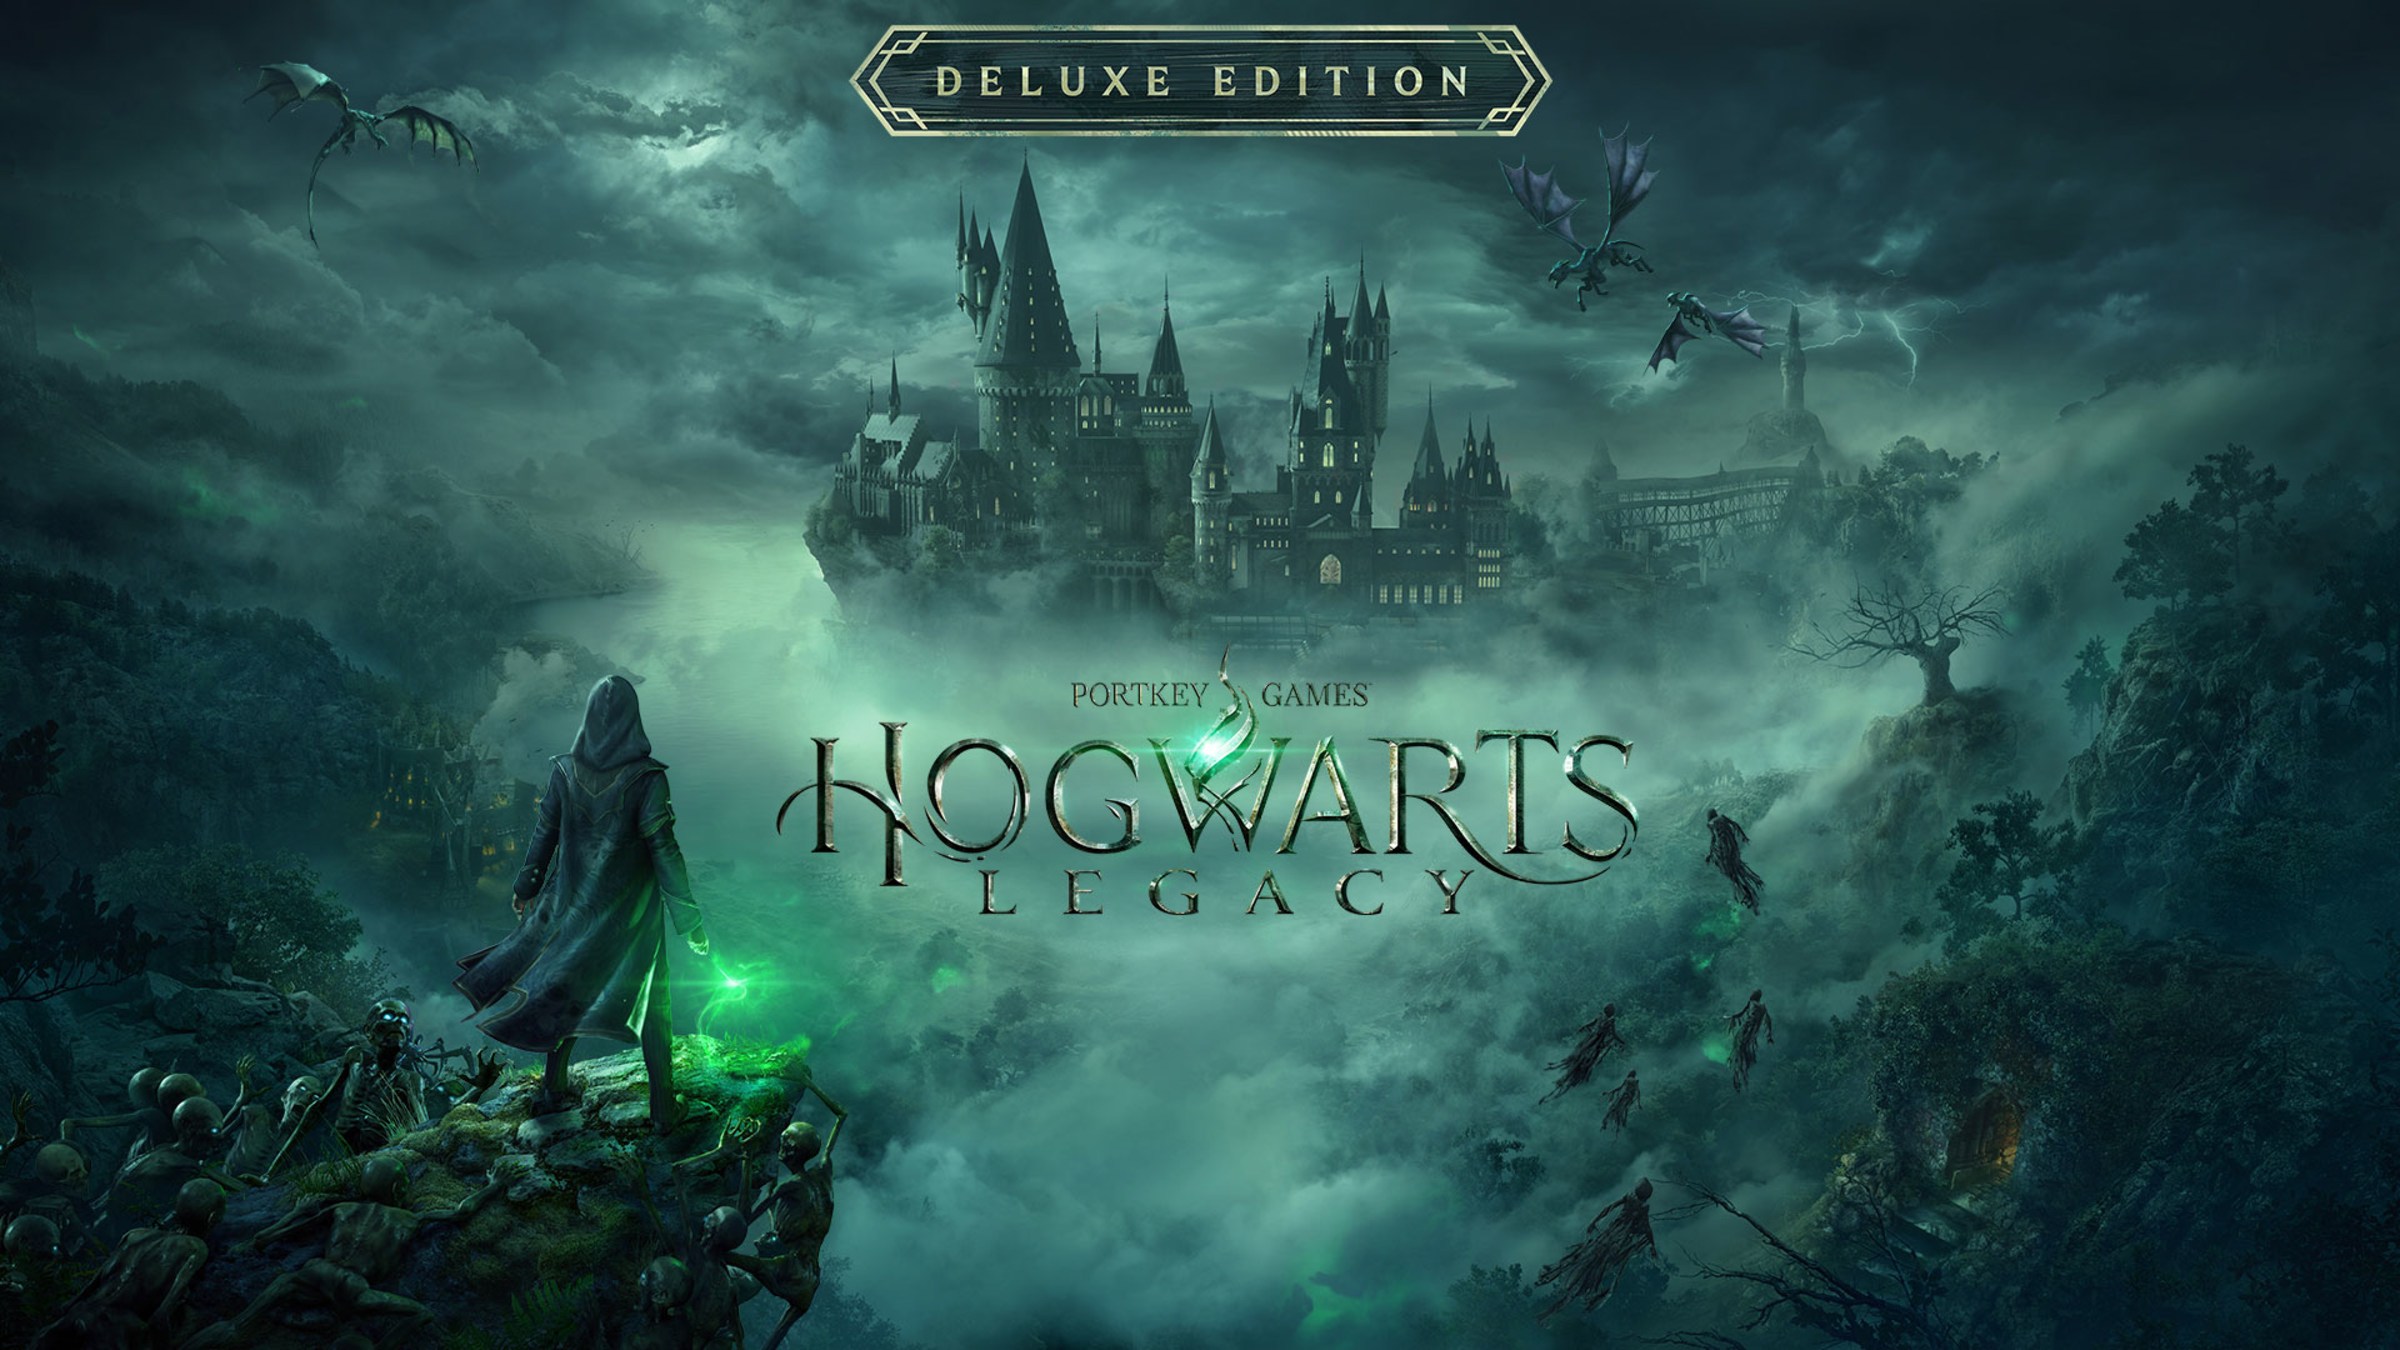 Experience a Magical and Sensual Adventure with the Hogwarts Legacy Digital Deluxe Edition